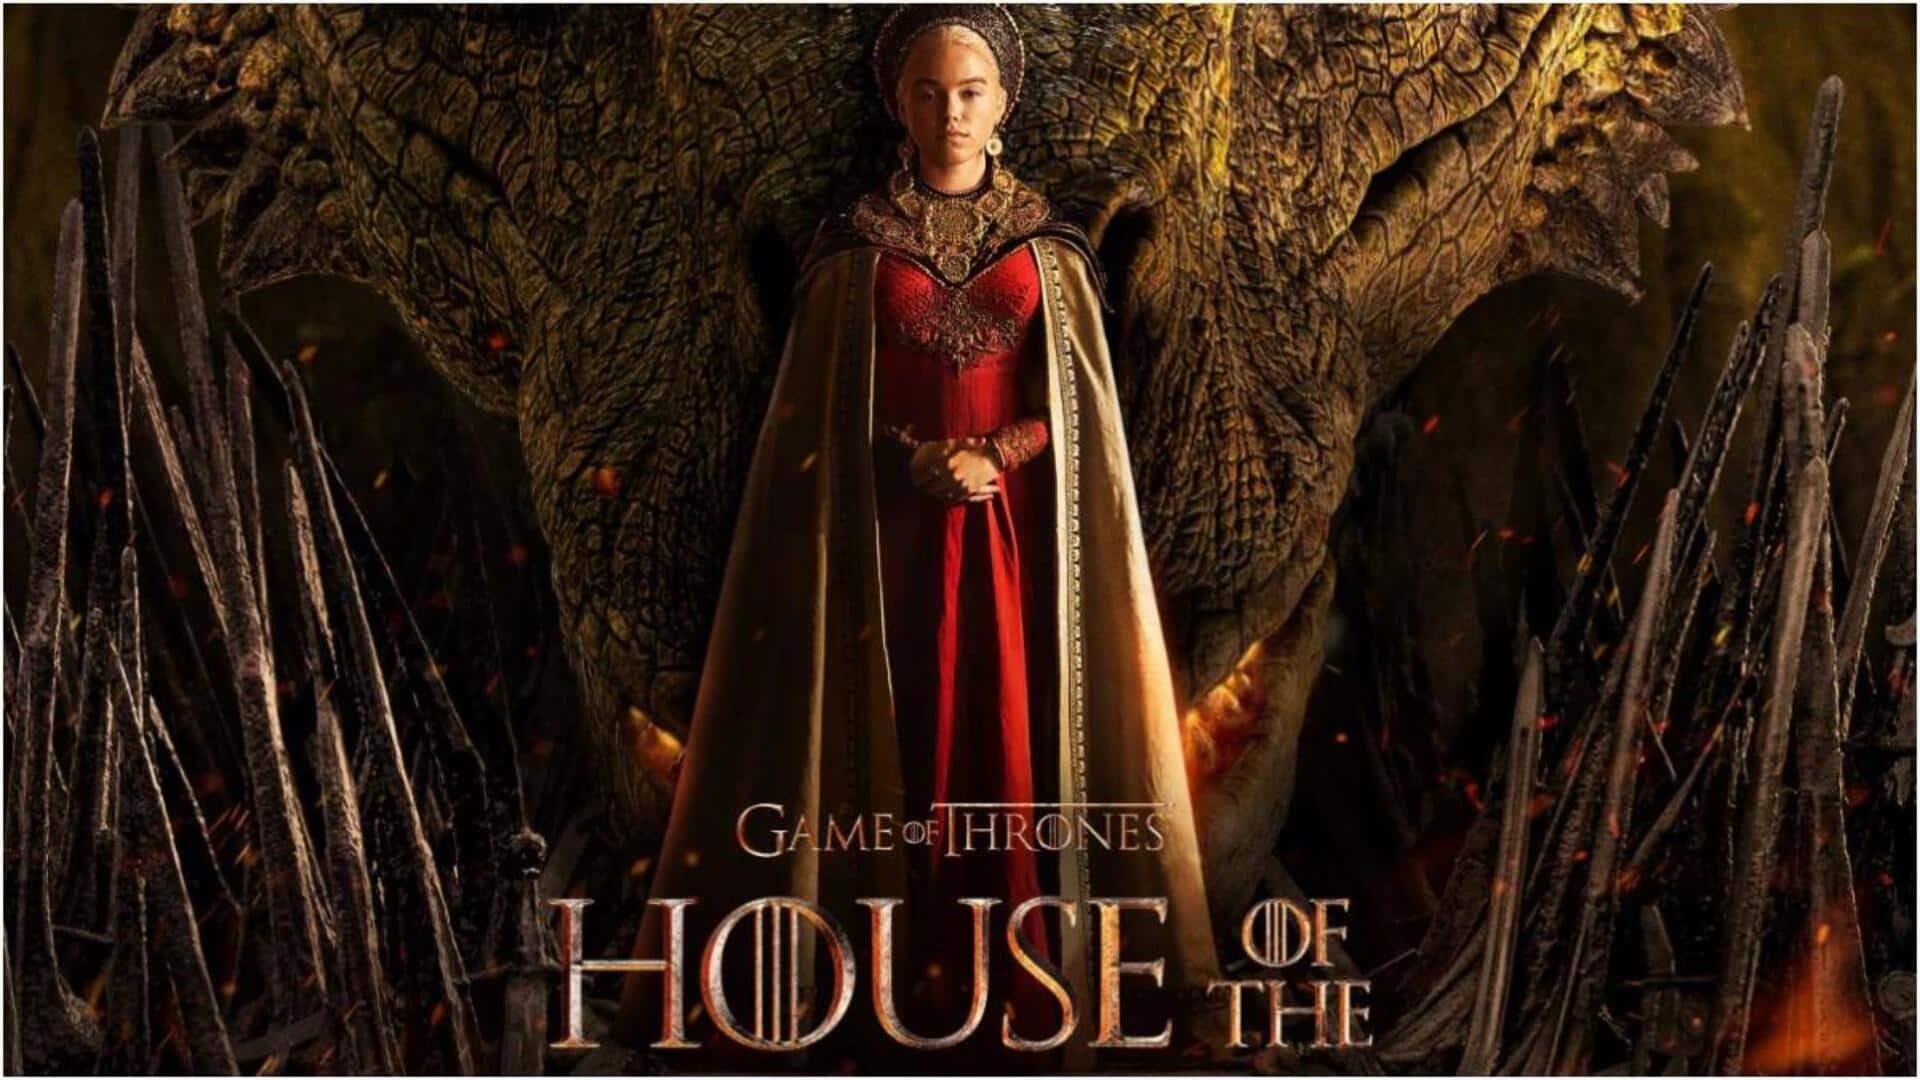 HBO announces 'House of the Dragon' Season 2 release date